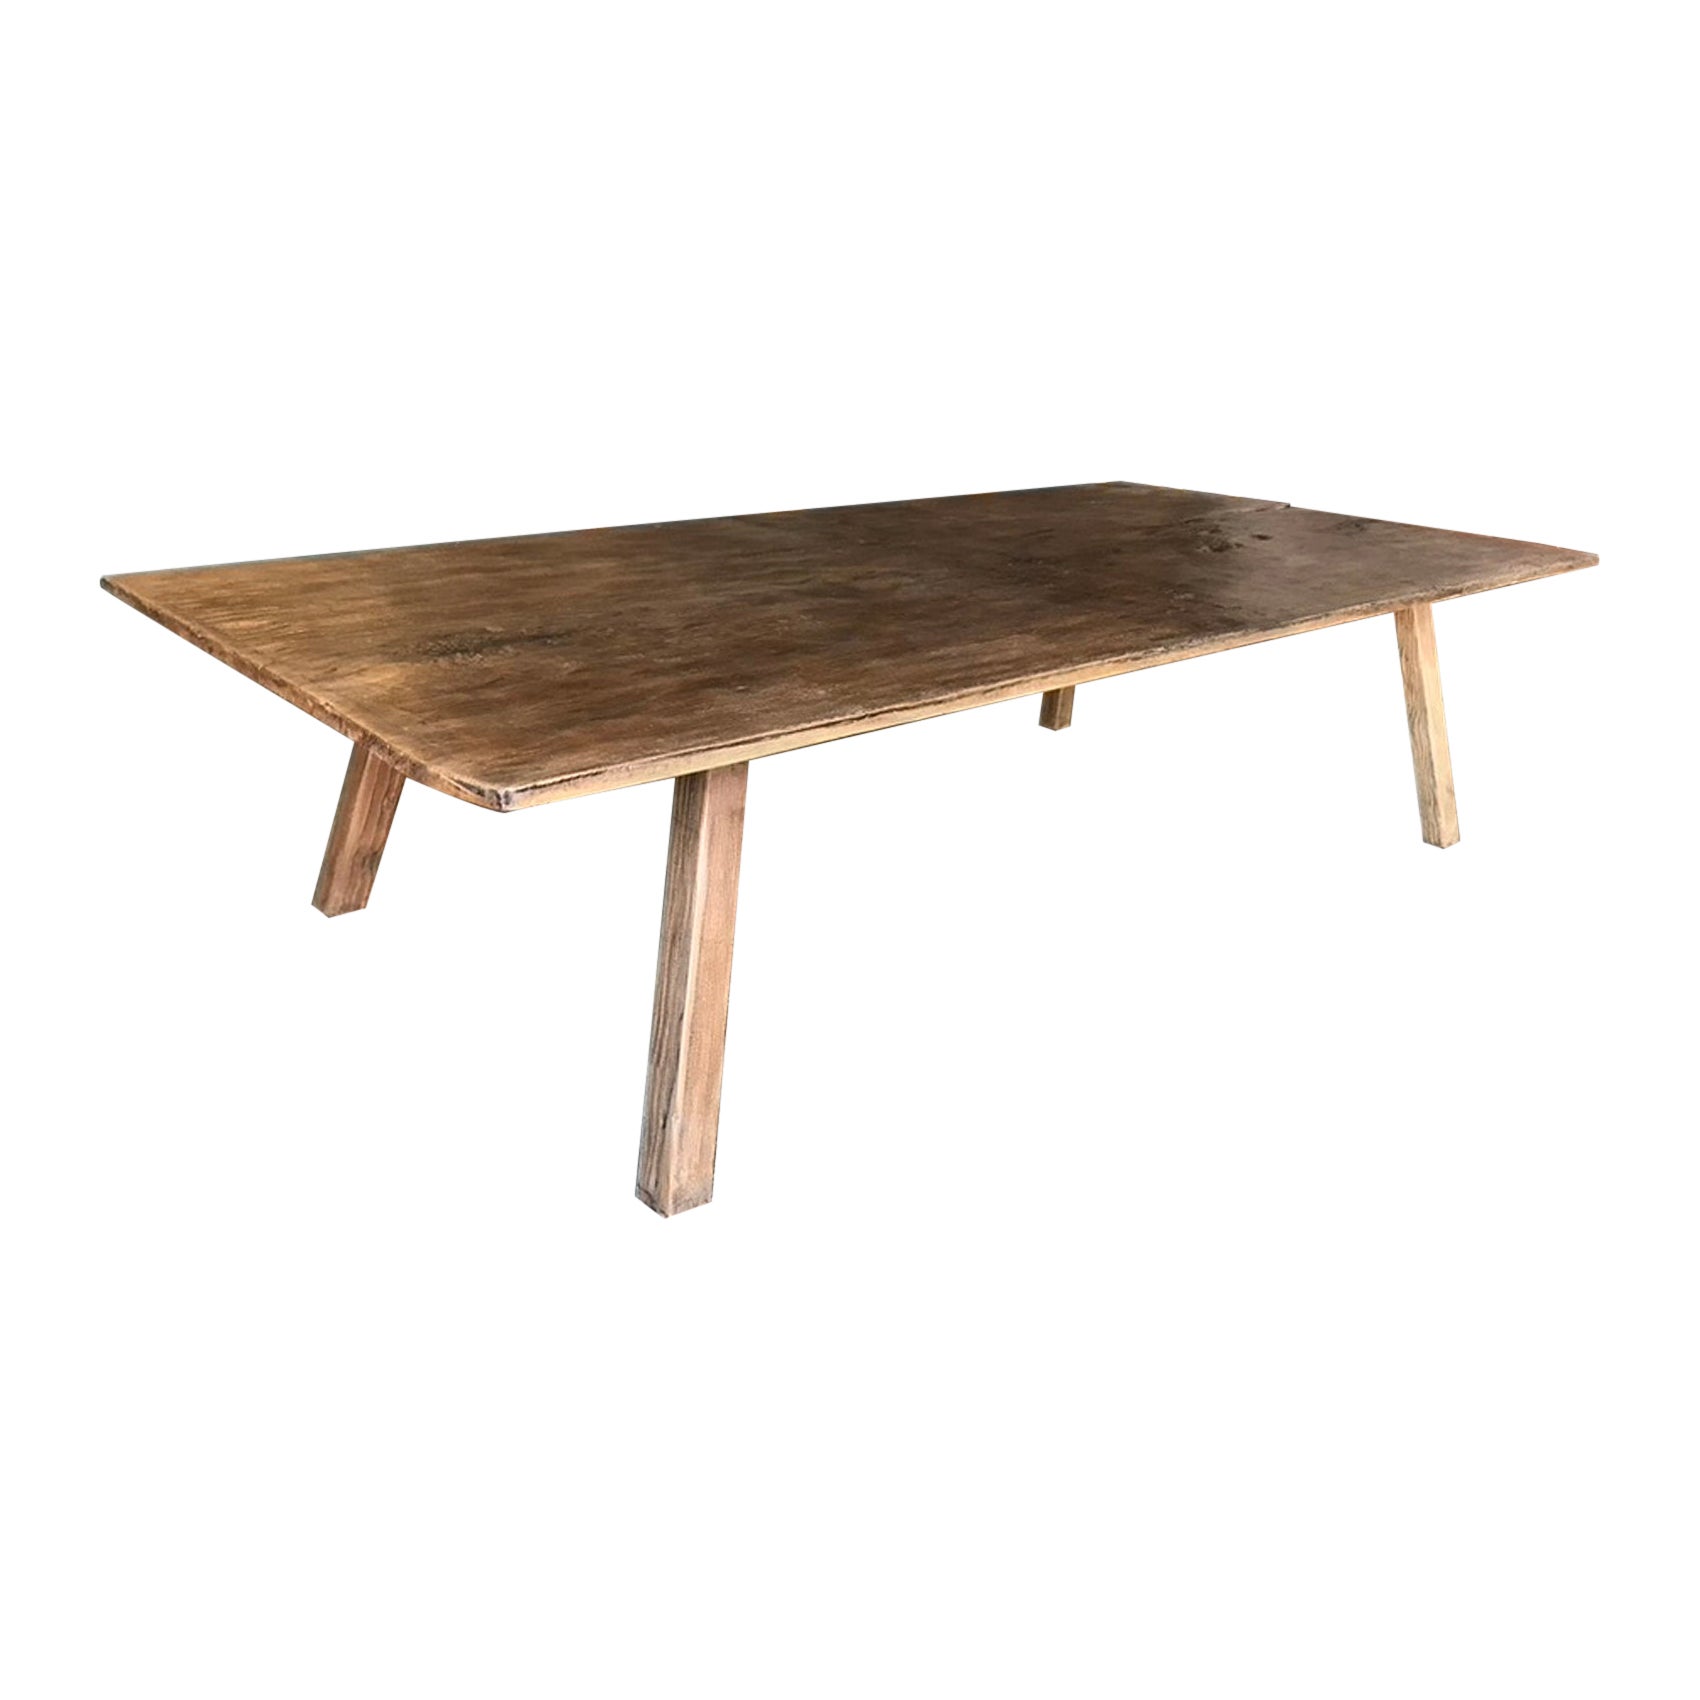 One Wide Board Hand Hewn Coffee Table For Sale